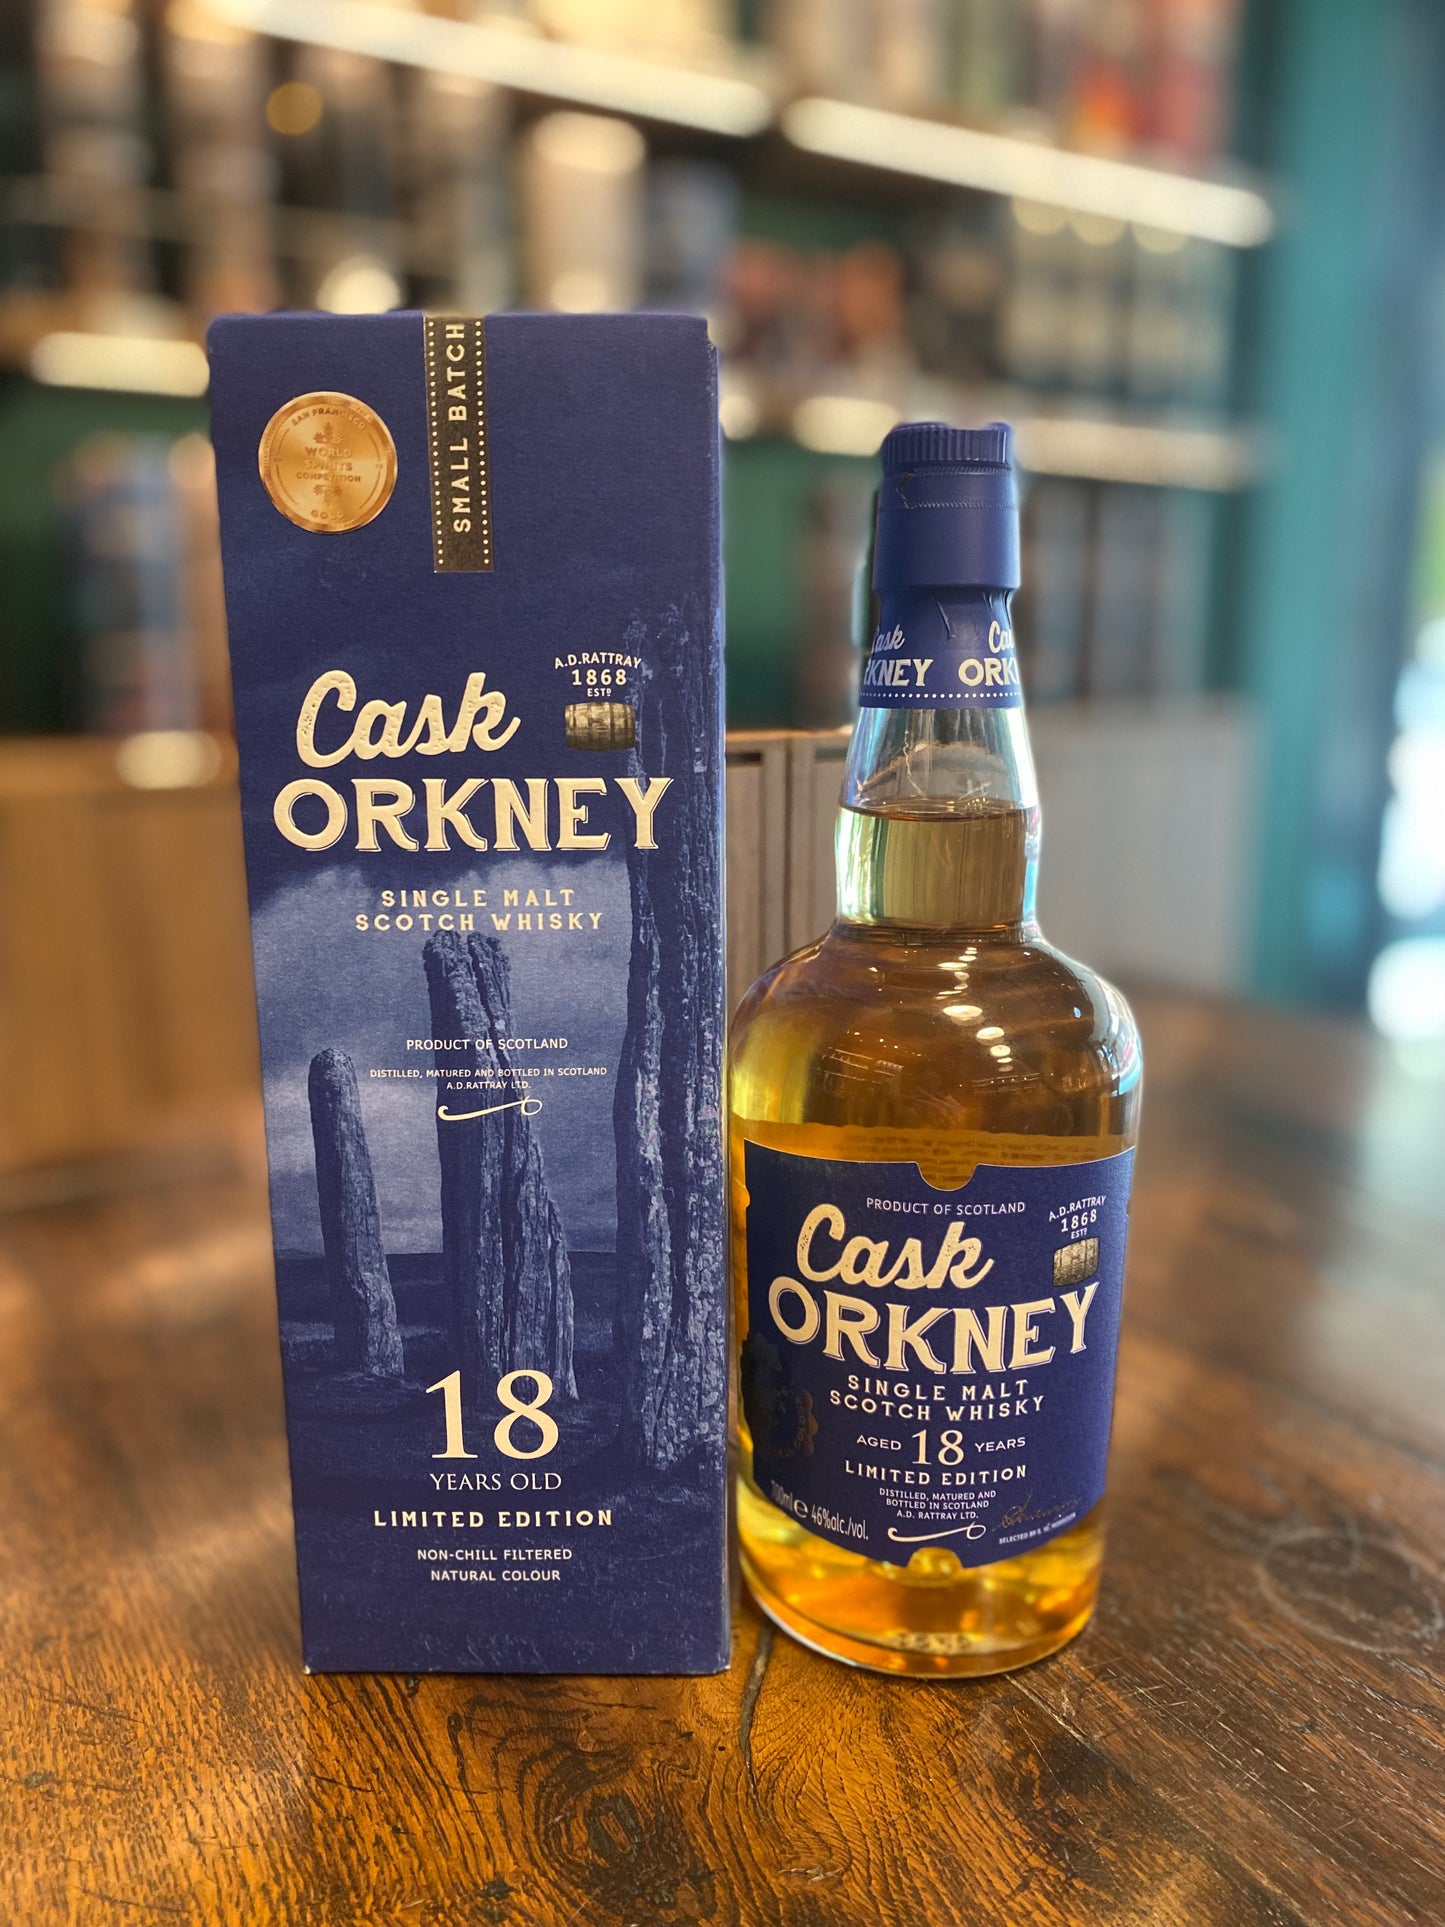 A.D.RATTRAY, Cask Orkney 18 Year Old Scotch Whisky,700ml,46%